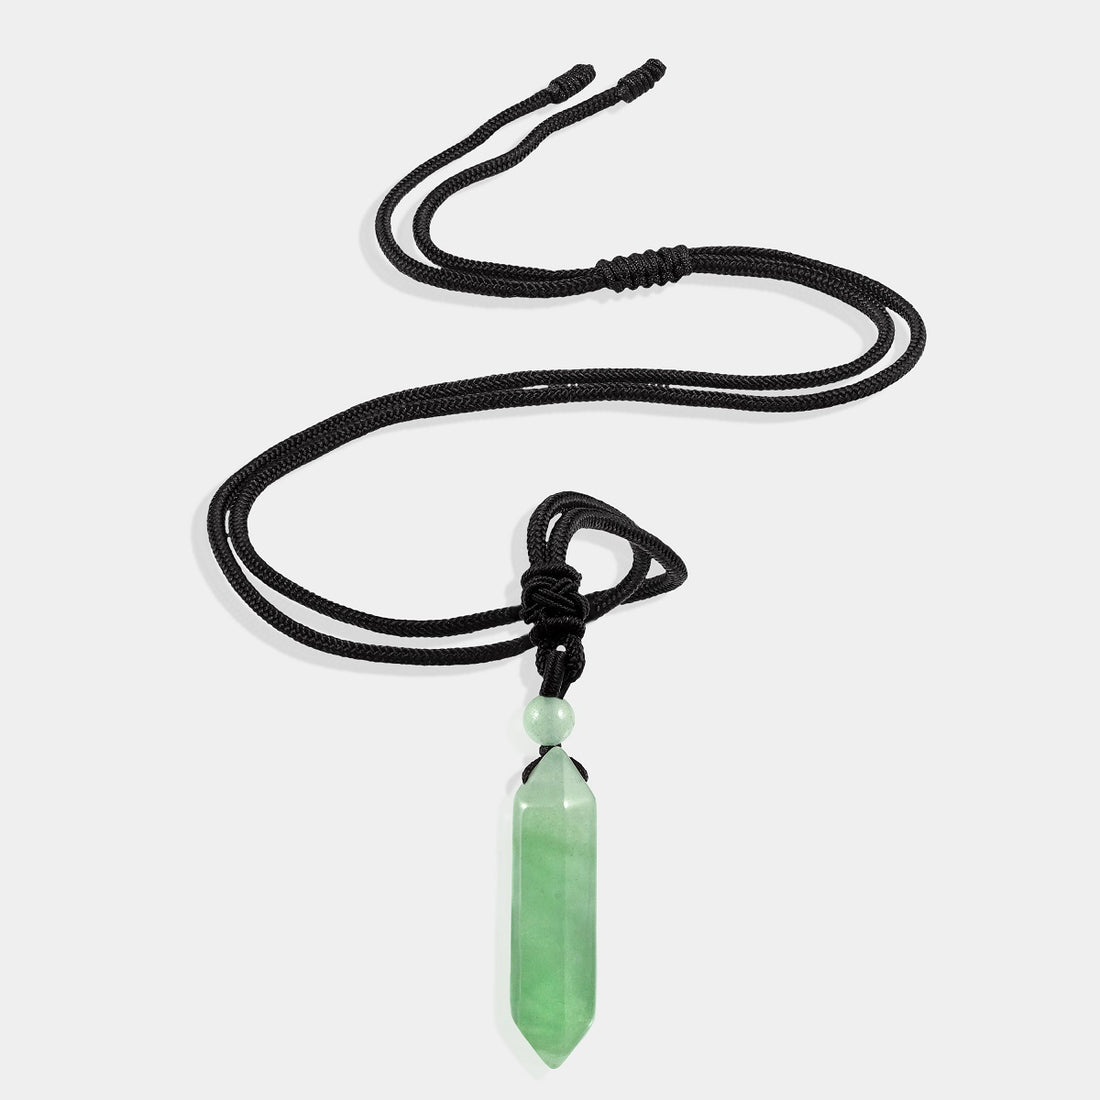 A stunning pendant necklace featuring a natural green aventurine gemstone in a hexagon-cut, wrapped in an intricate design.